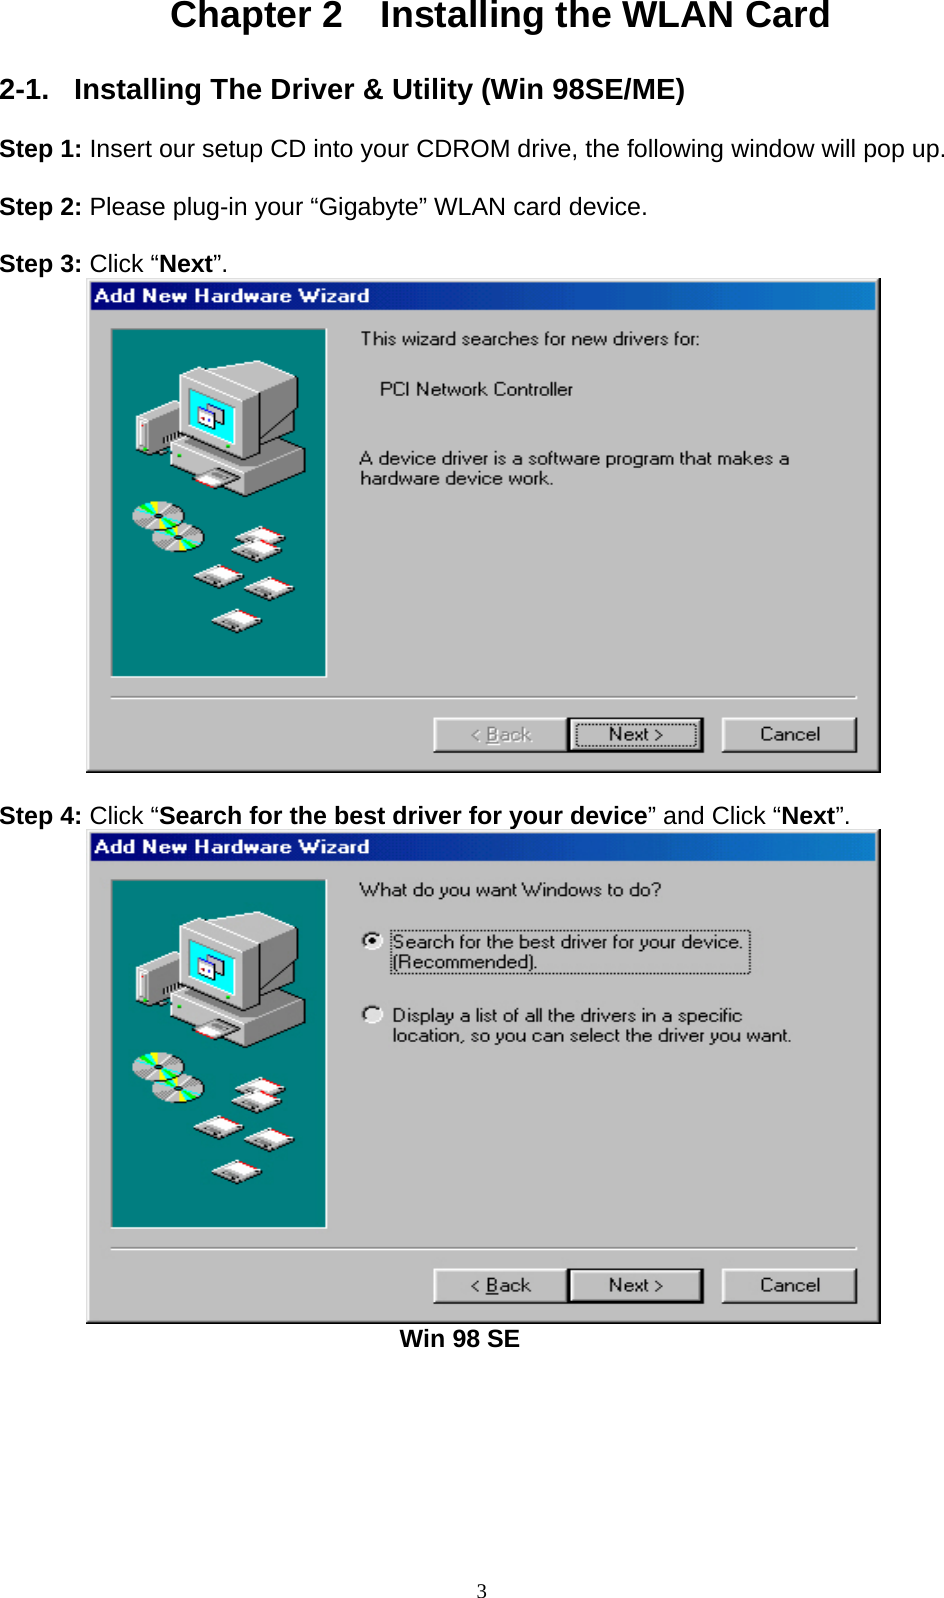 3  Chapter 2    Installing the WLAN Card  2-1.  Installing The Driver &amp; Utility (Win 98SE/ME)  Step 1: Insert our setup CD into your CDROM drive, the following window will pop up.  Step 2: Please plug-in your “Gigabyte” WLAN card device.  Step 3: Click “Next”.           Step 4: Click “Search for the best driver for your device” and Click “Next”.                                          Win 98 SE 